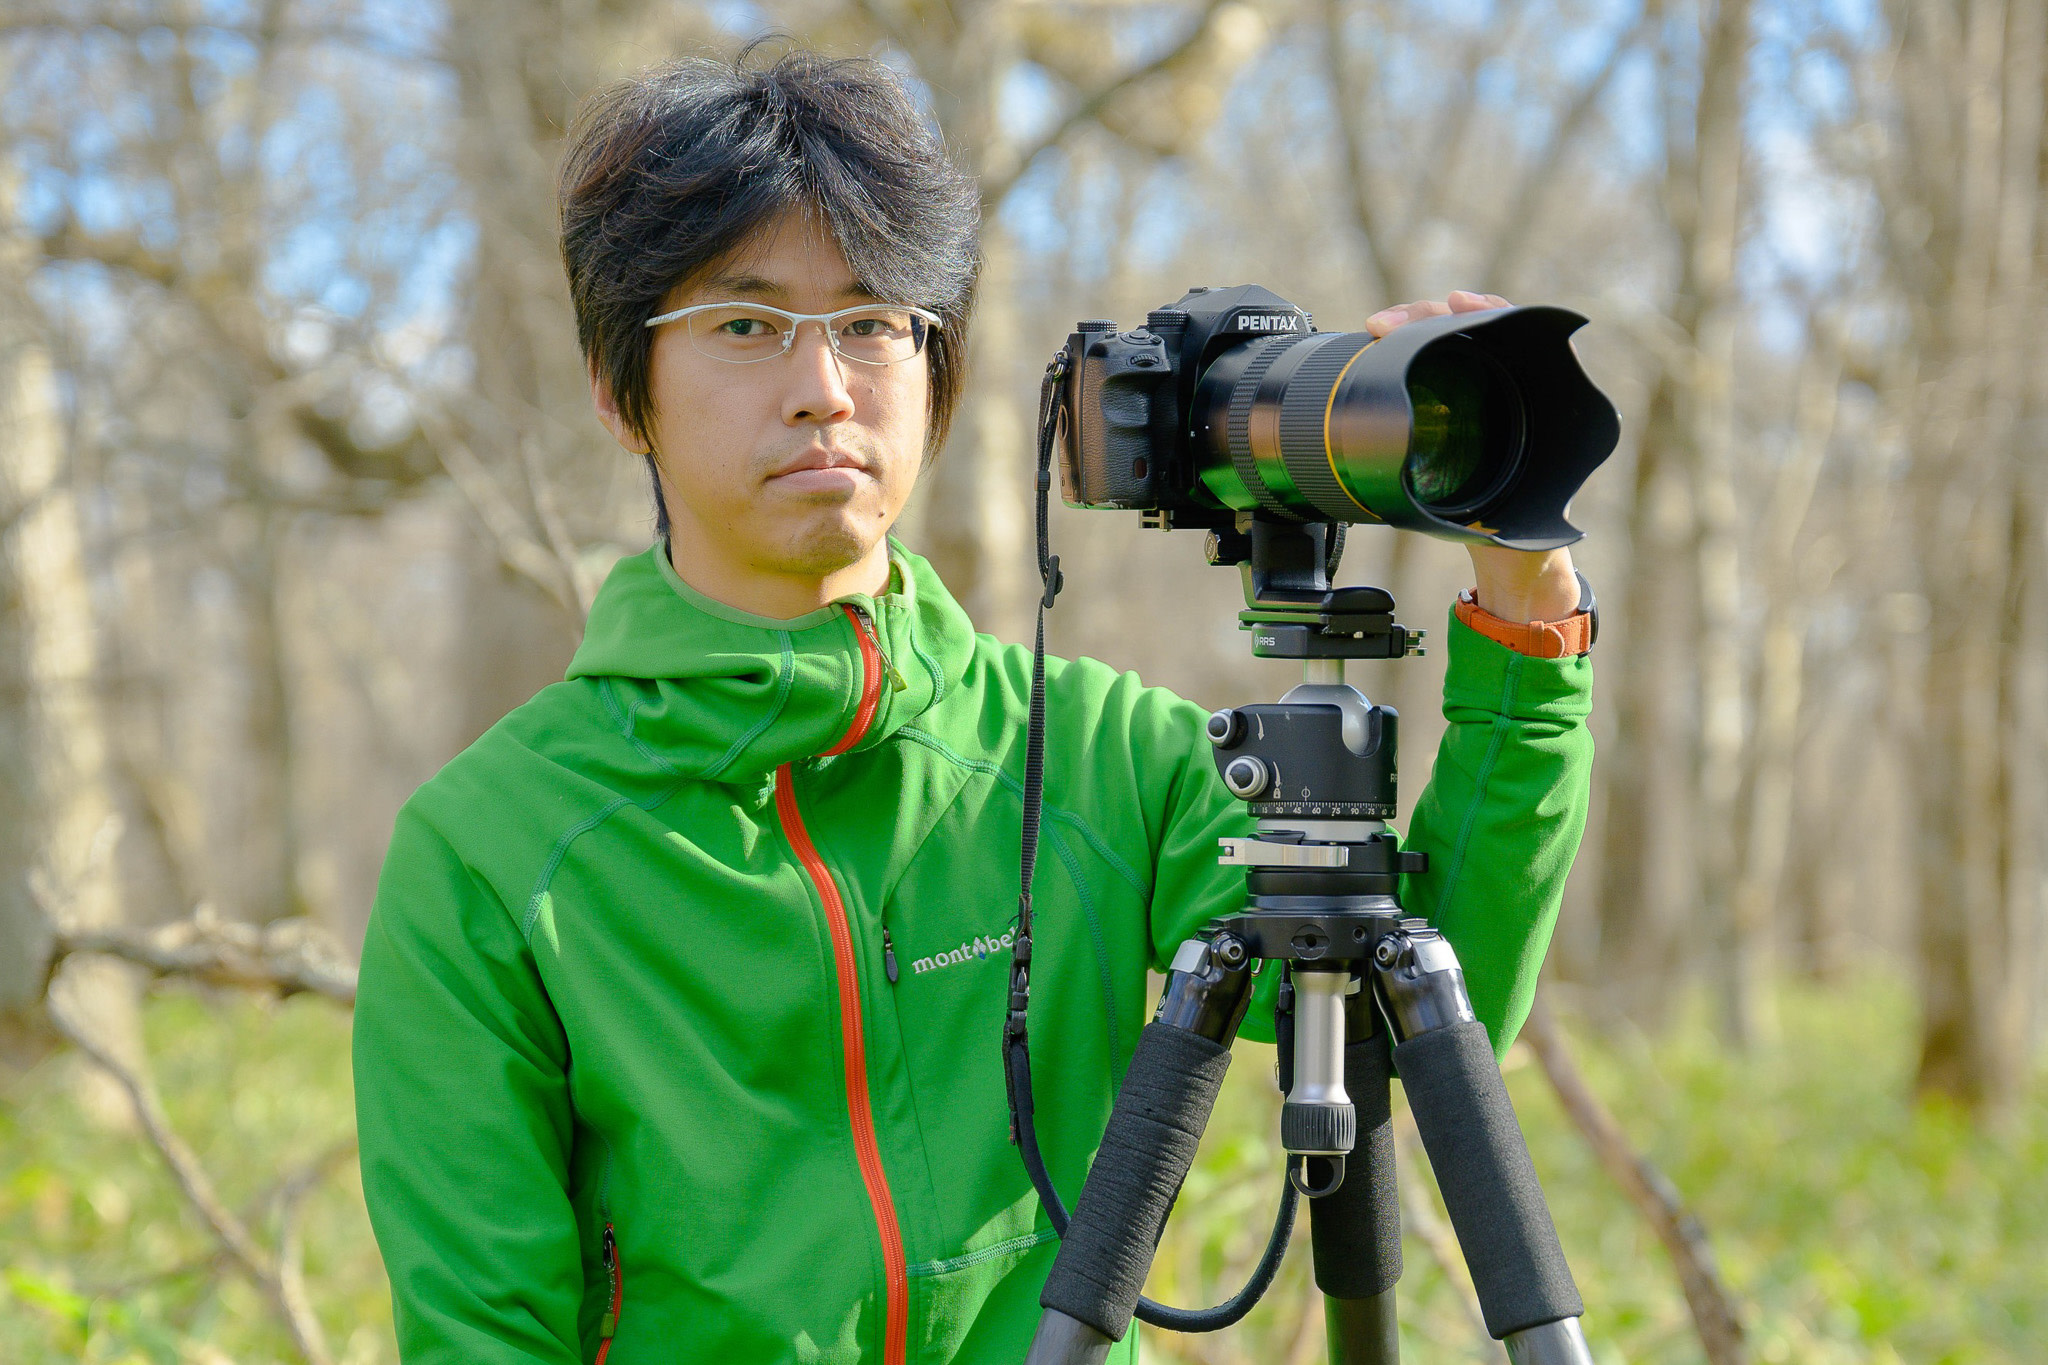 Yuto Hirasawa, an adventure Hokkaido guide, smiles at the camera. He is stood behind a camera mounted on a tripod. His hand rests on a large zoom lens.